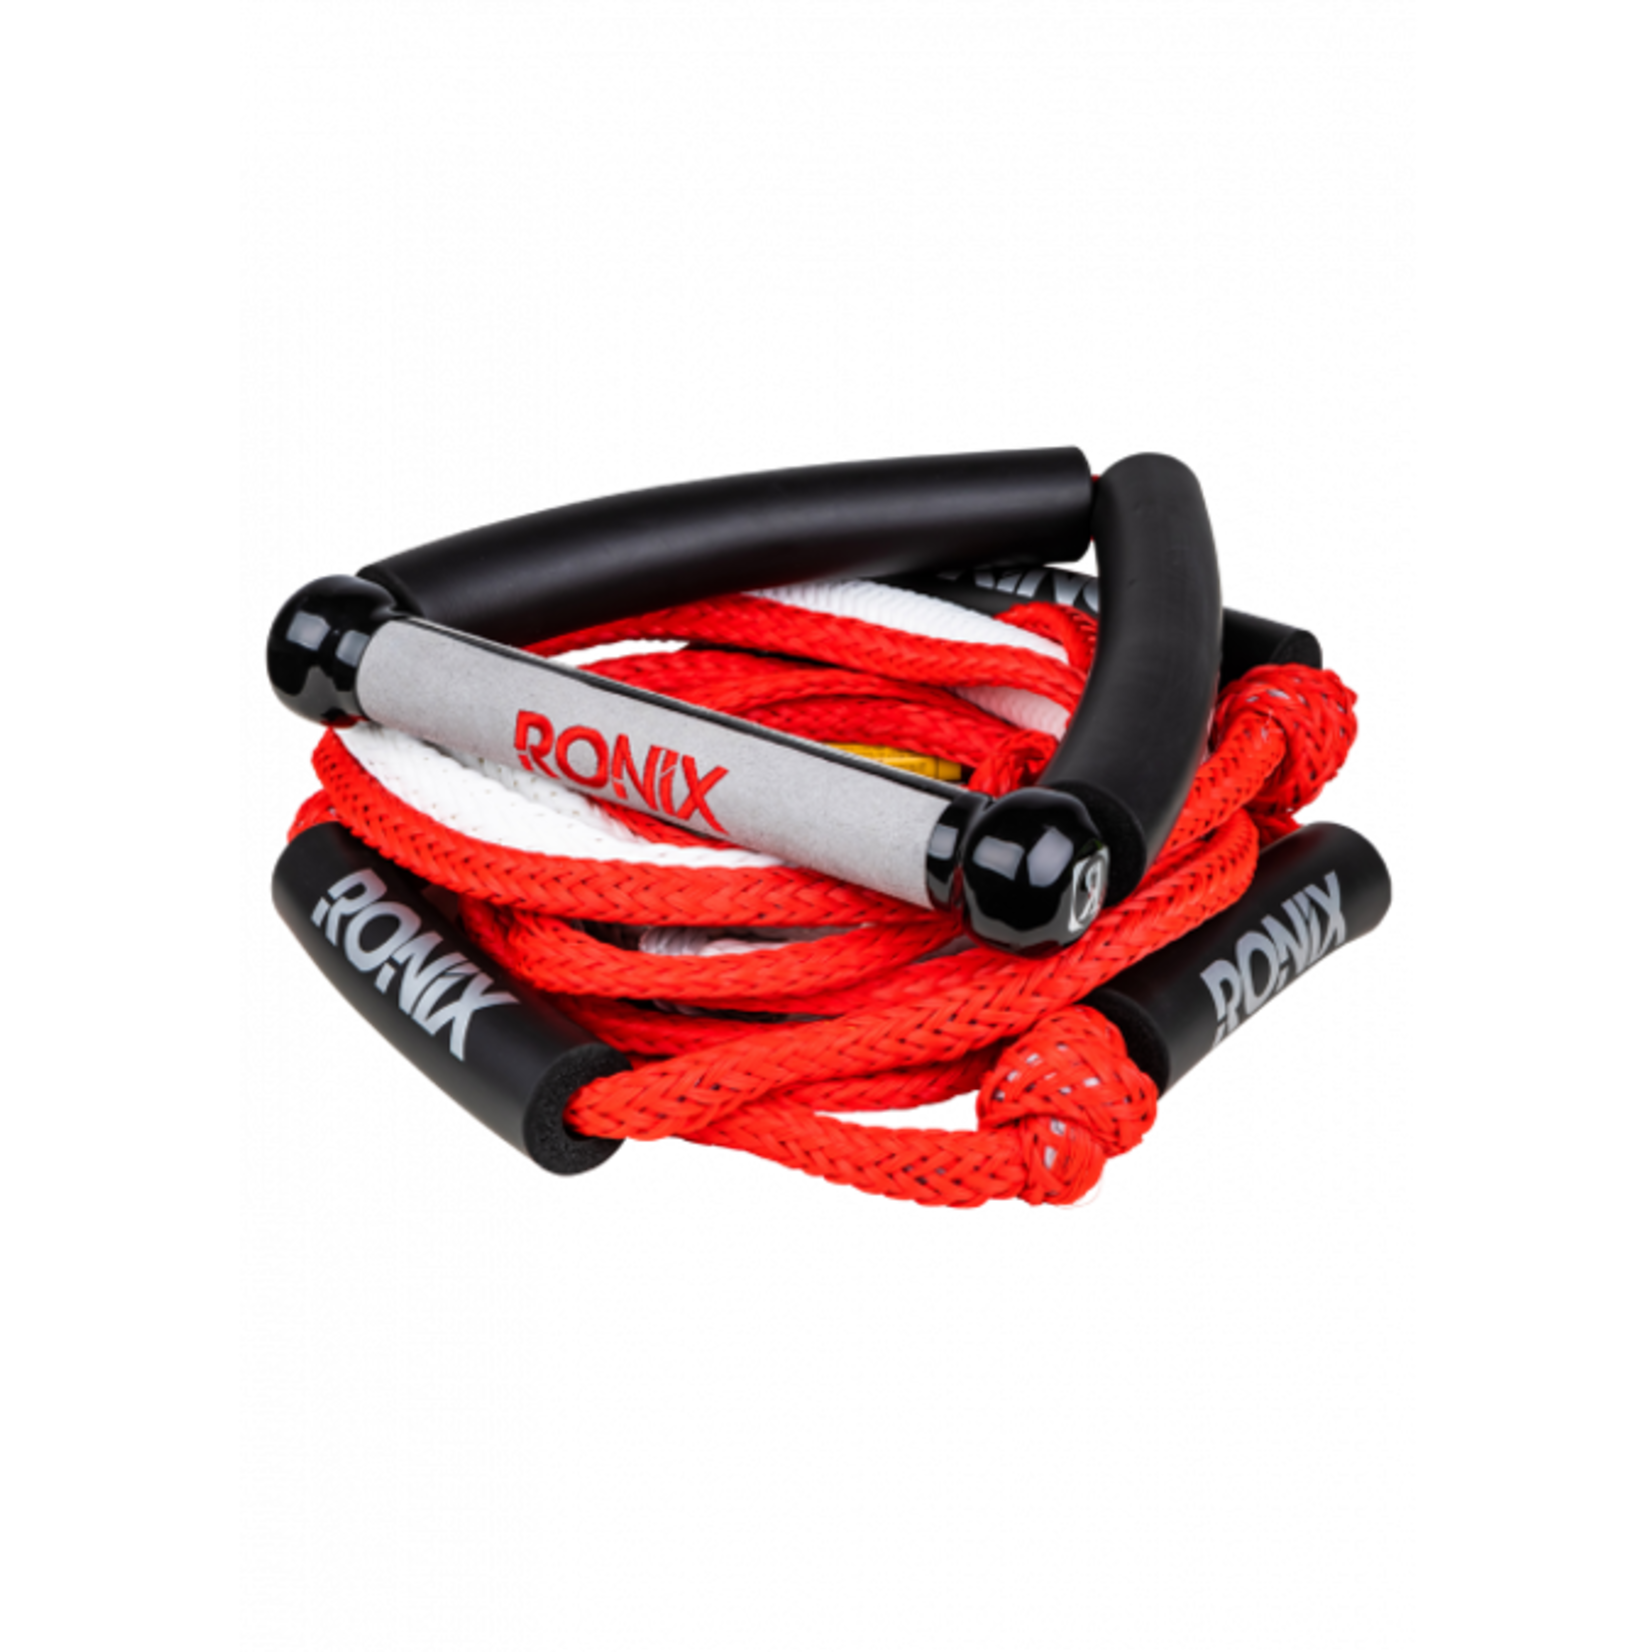 Ronix Bungee Surf Rope